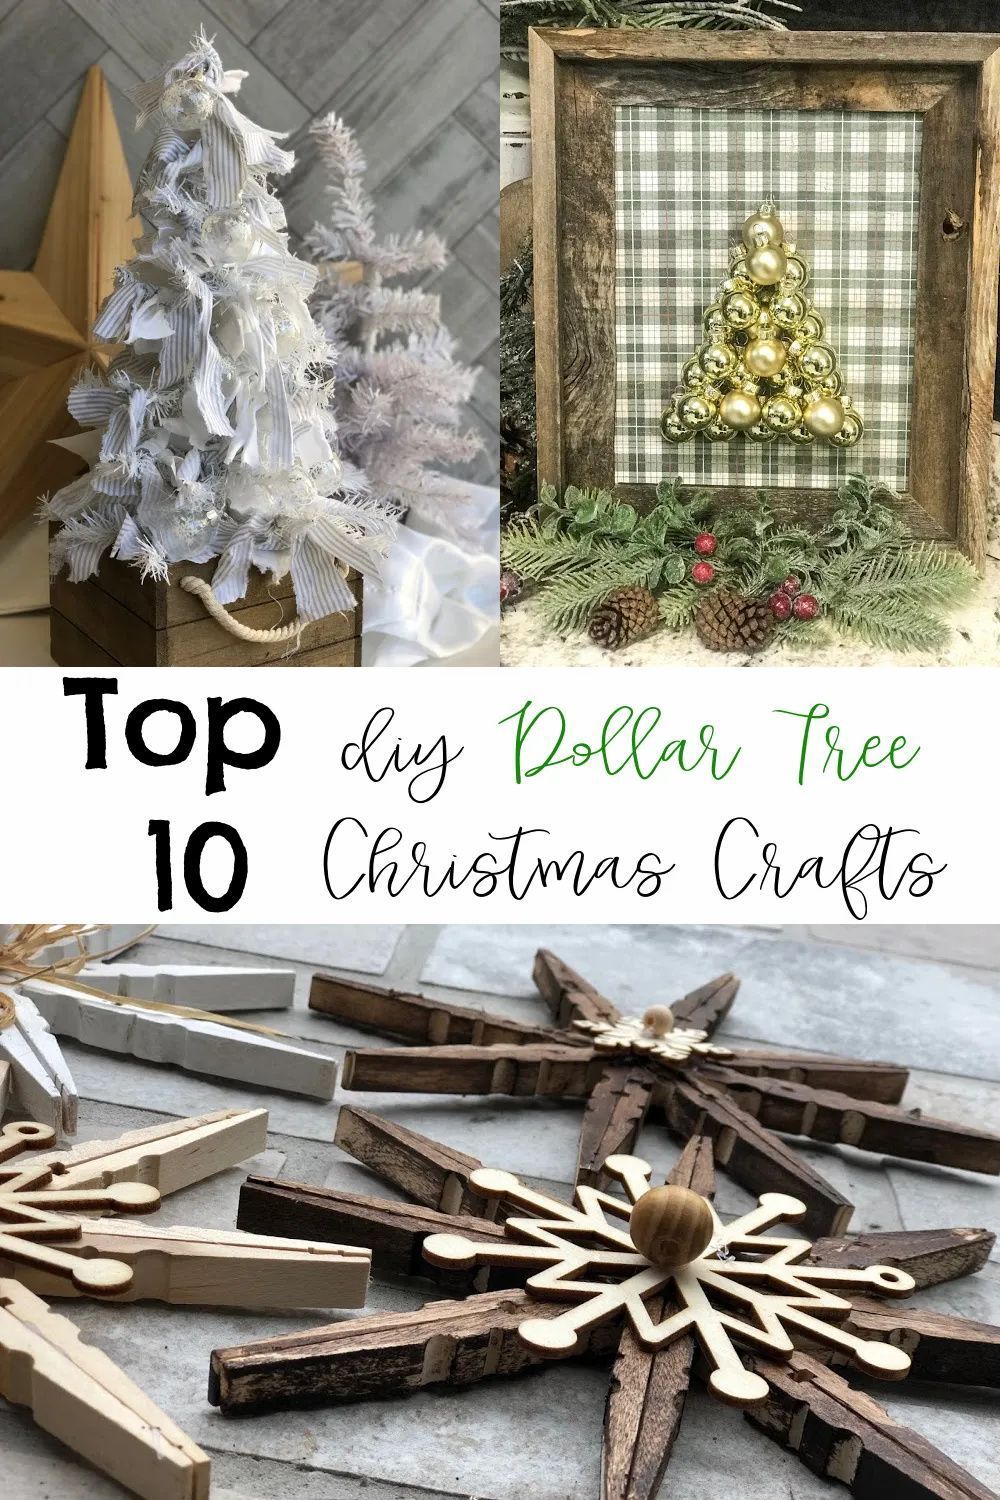 Top 10 Dollar Tree Christmas Projects - Re-Fabbed -   18 diy christmas decorations dollar tree simple ideas